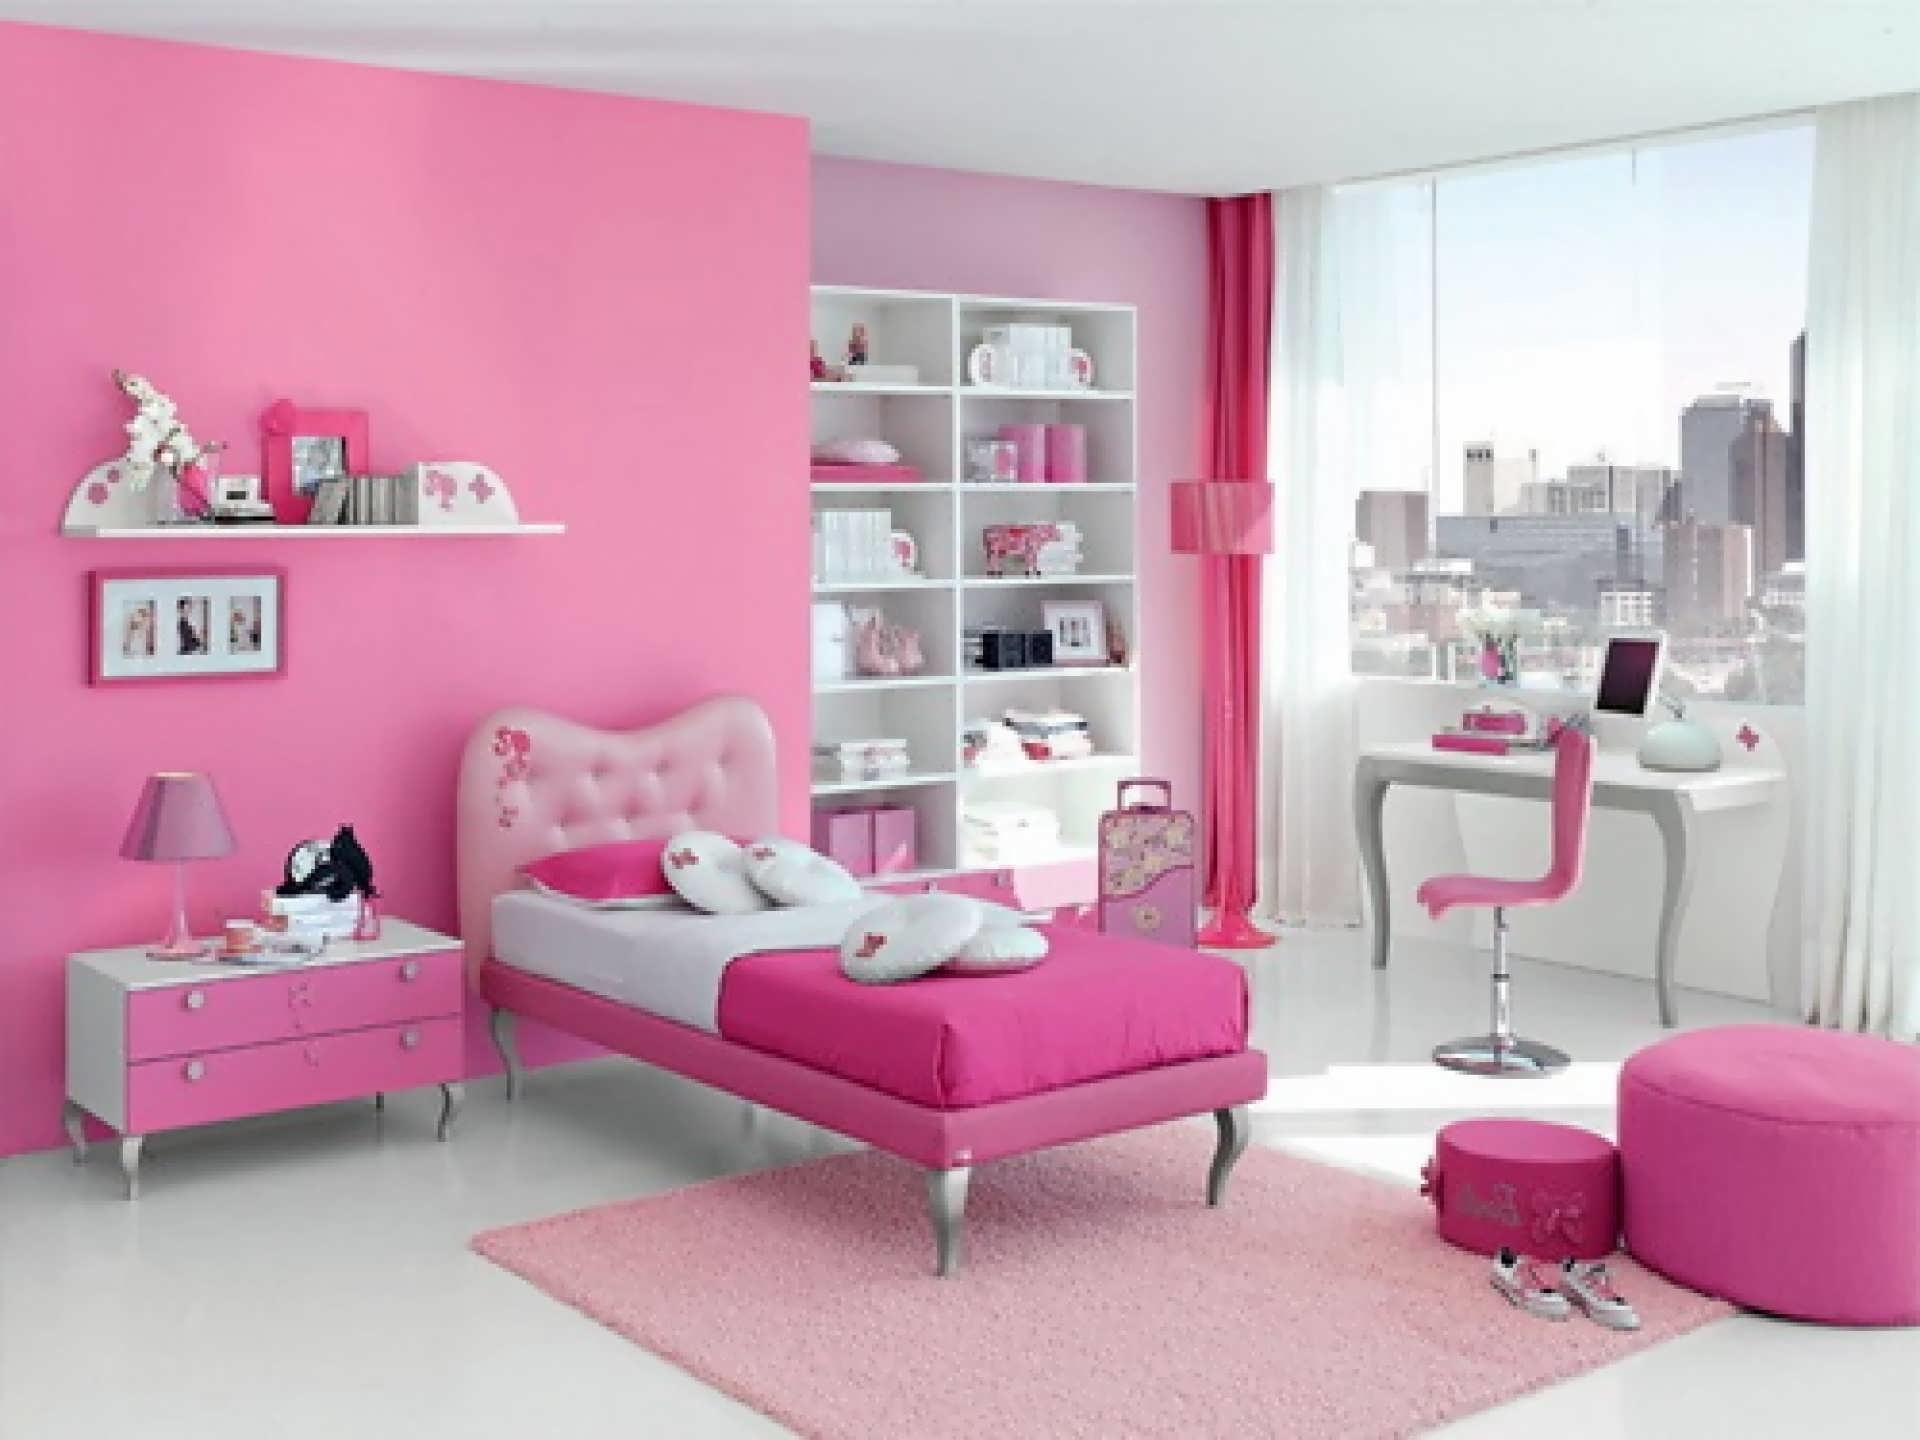 girly wallpapers for bedrooms,furniture,bedroom,pink,room,bed